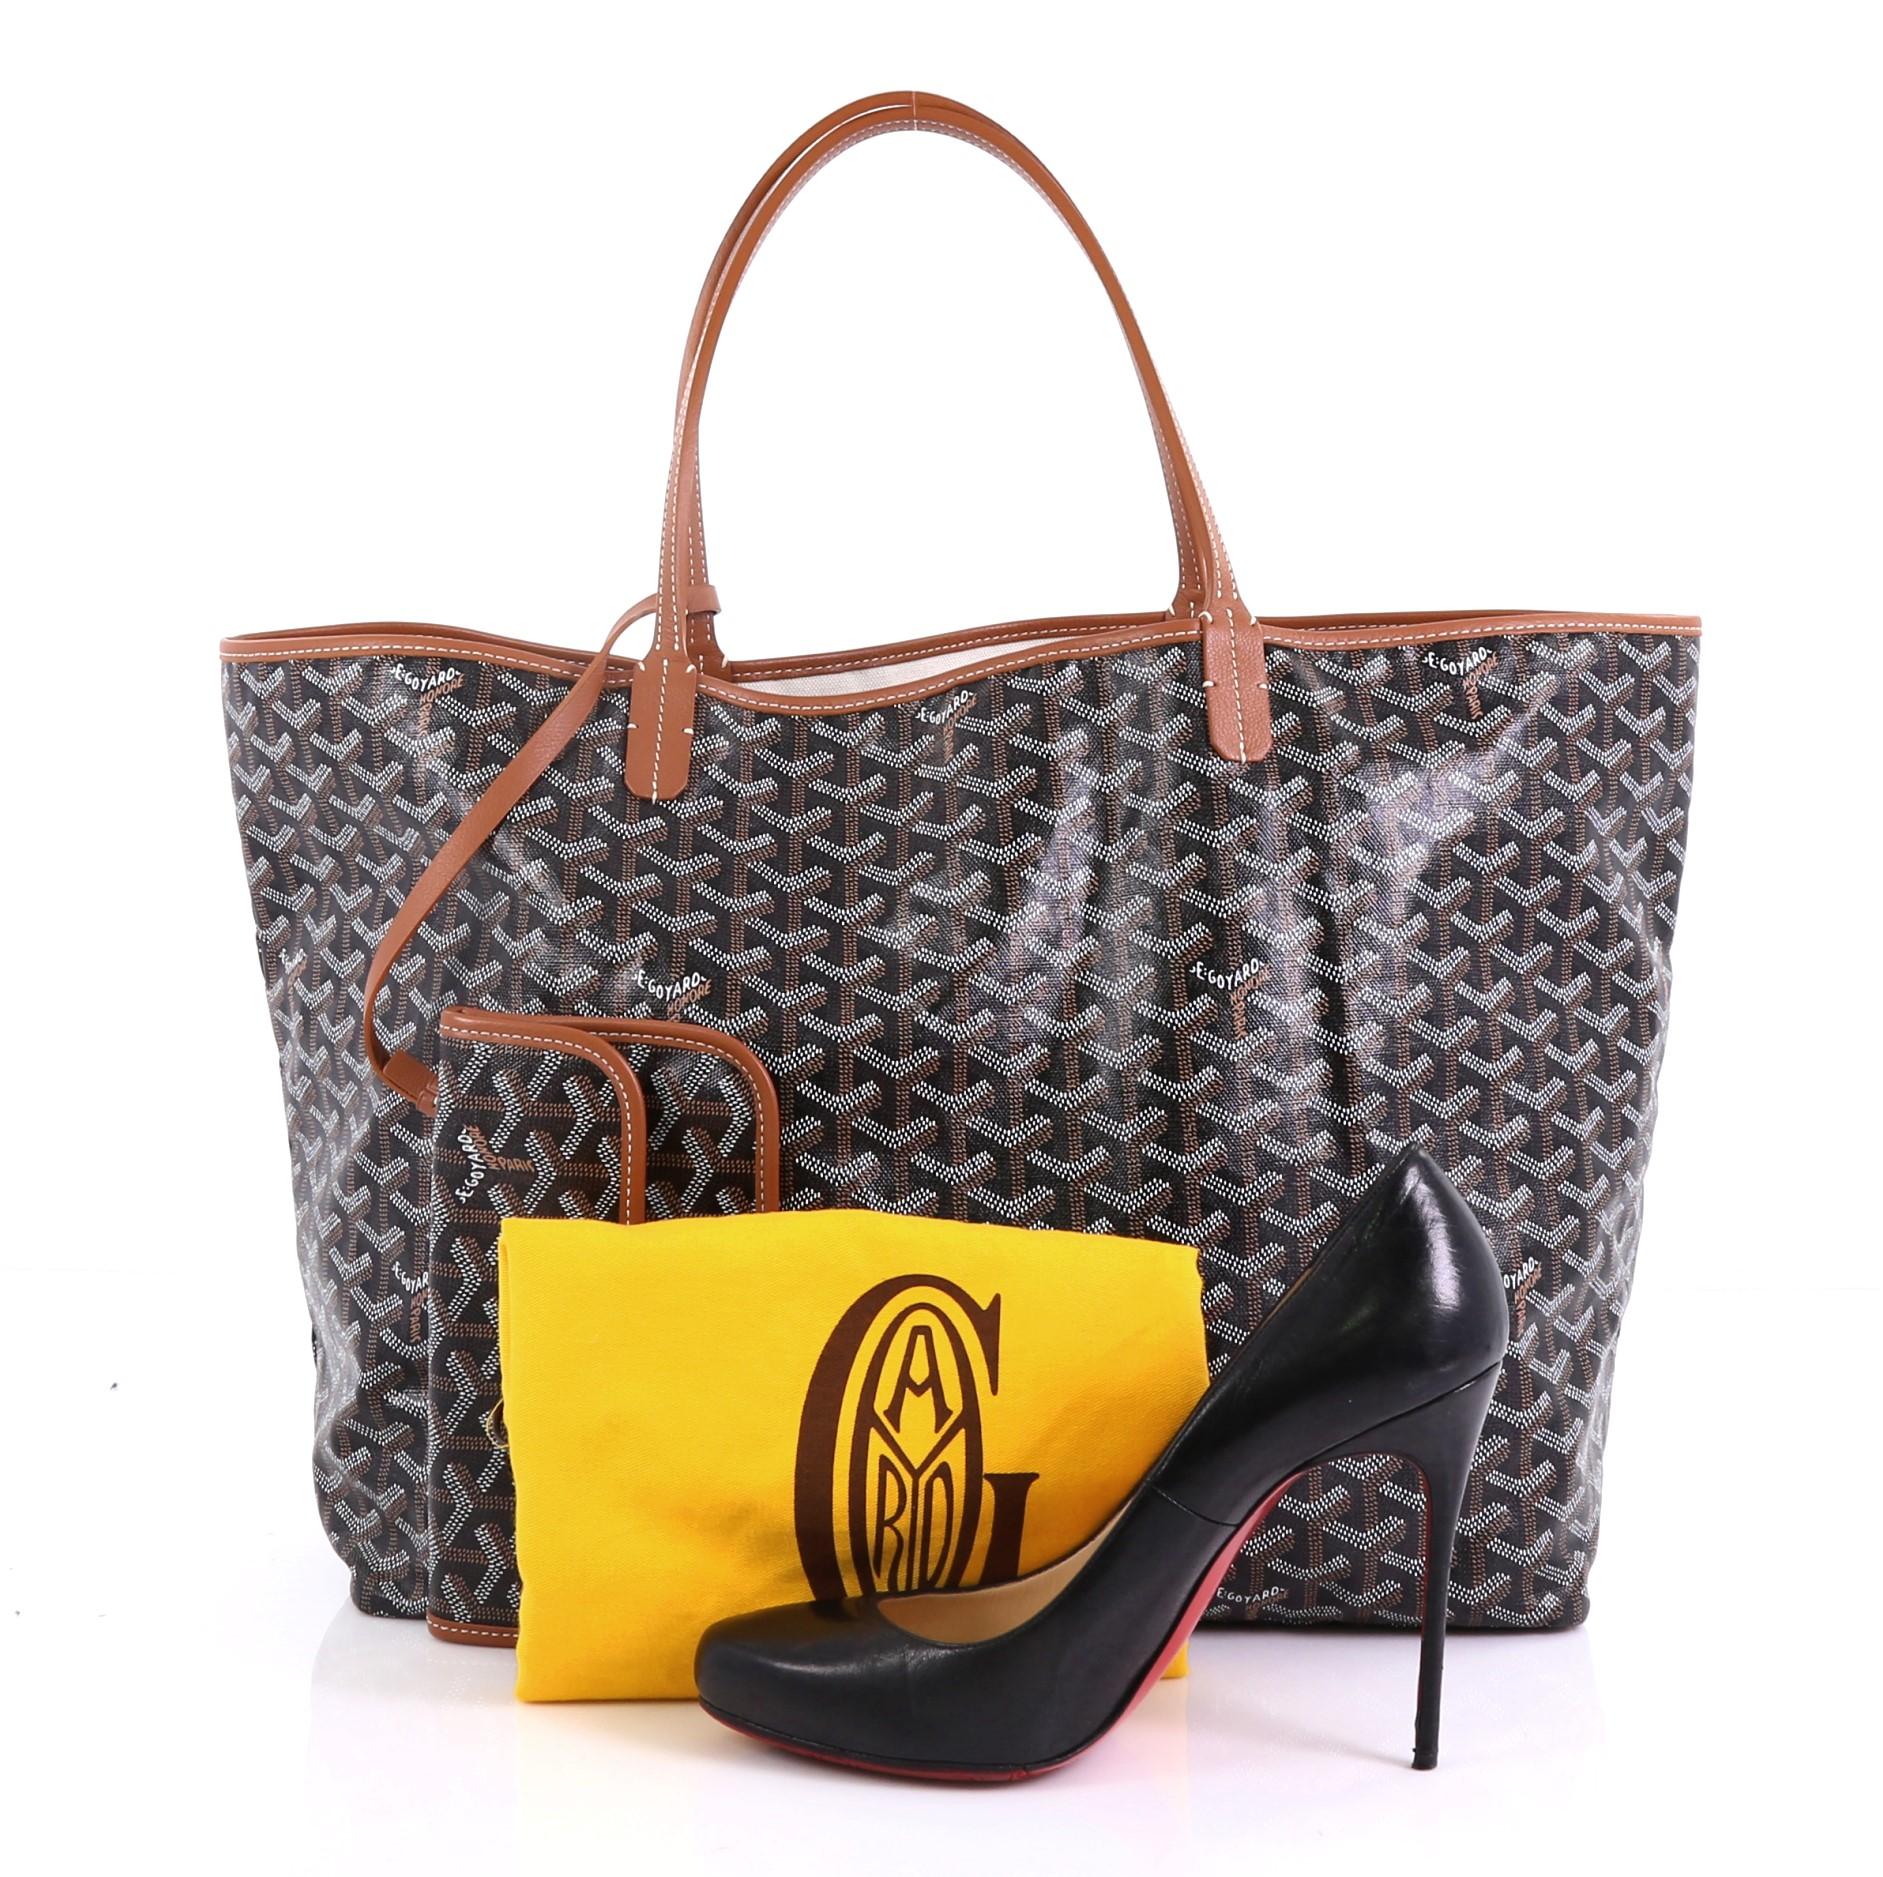 This Goyard St. Louis Tote Coated Canvas GM, crafted in black coated canvas and brown leather, features flat leather handles and silver-tone hardware. Its wide open top showcases a beige fabric interior. **Note: Shoe photographed is used as a sizing